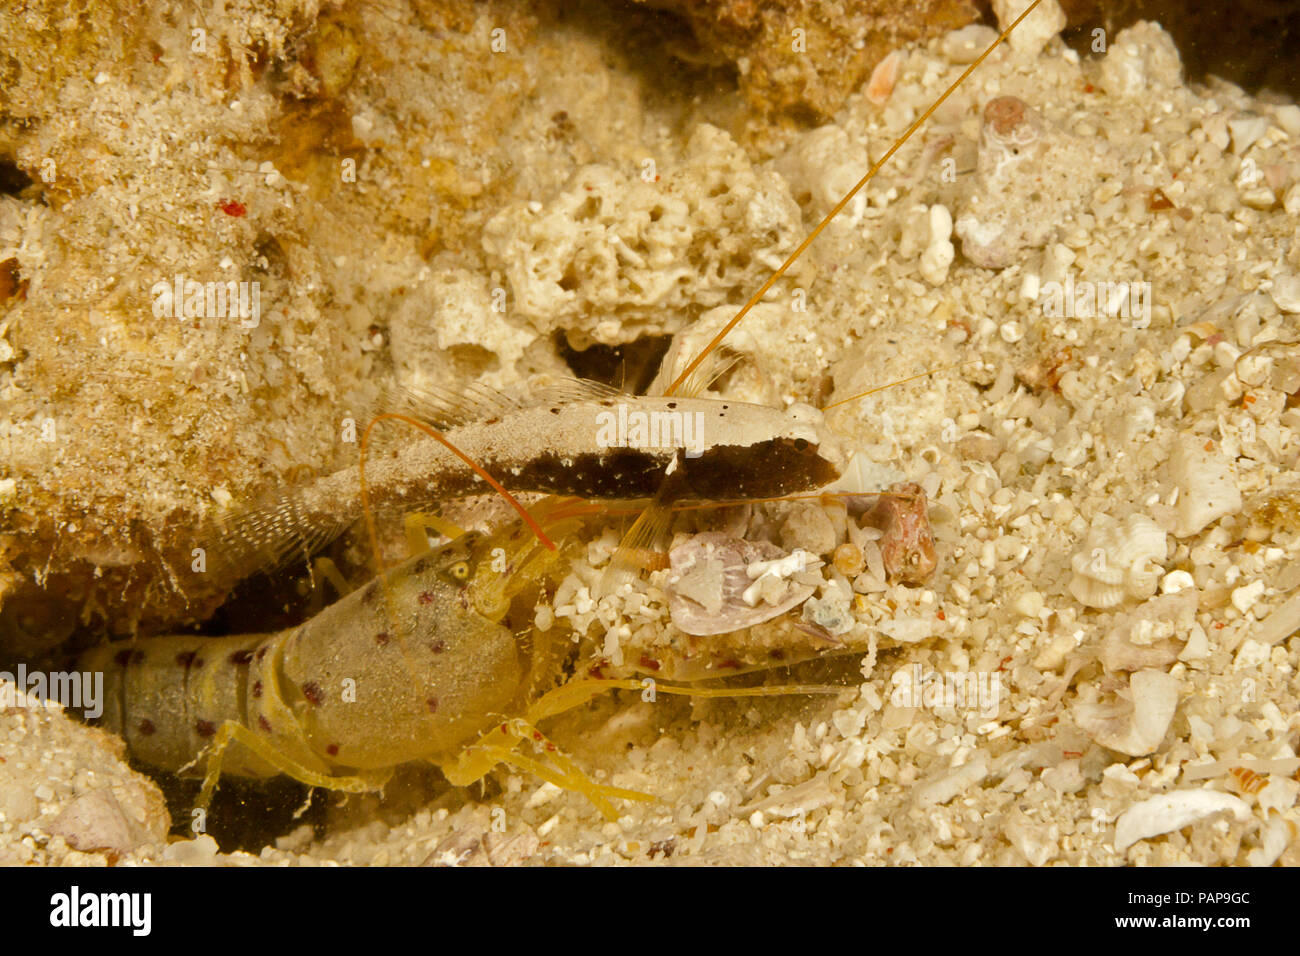 The Skunk shrimp-goby, Mars albidorsus, lives with this blind snapping shrimp, Alpheus sp. who is excavating their den.  Malaysia. Stock Photo